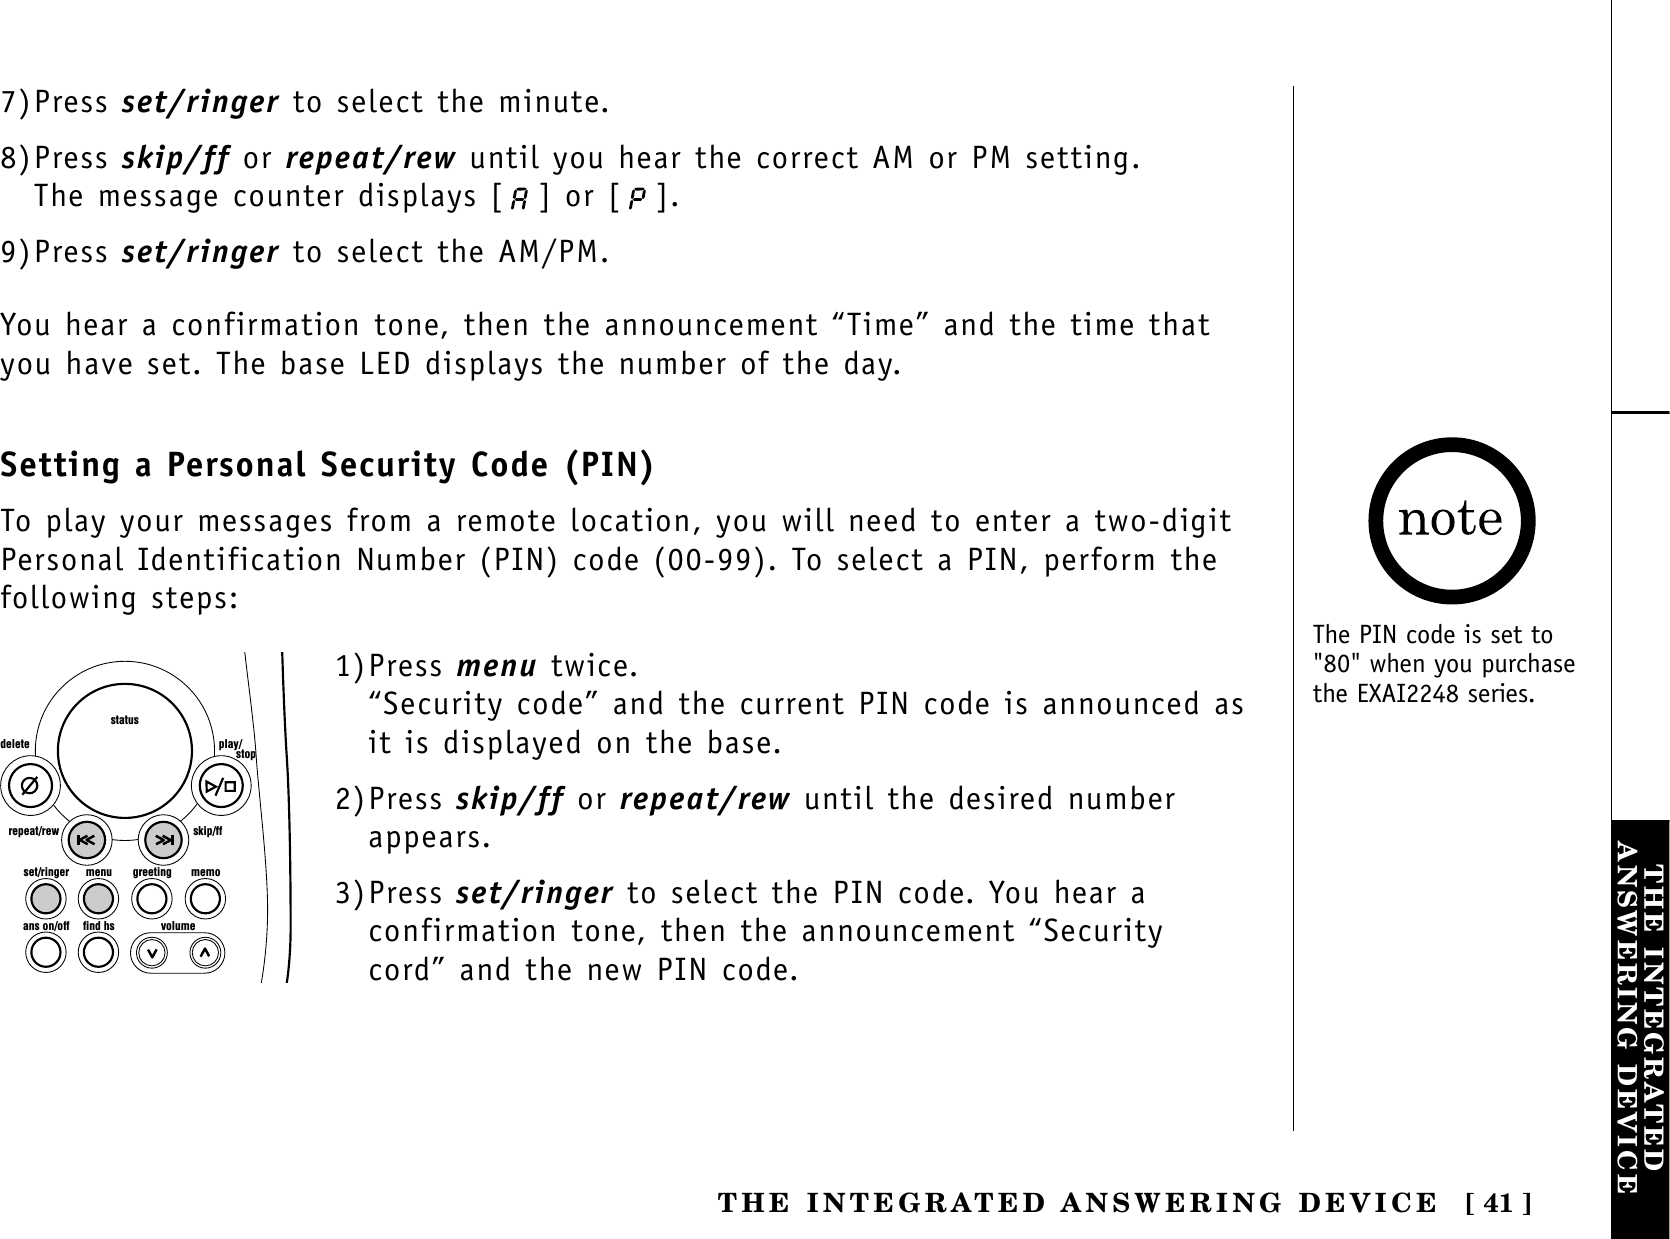 [ 41 ]THE INTEGRATEDANSWERING DEVICETHE INTEGRATED ANSWERING DEVICE7)Press set/ringer to select the minute.8)Press skip/ff or repeat/rew until you hear the correct AM or PM setting. The message counter displays [ ] or [ ]. 9)Press set/ringer to select the AM/PM.You hear a confirmation tone, then the announcement “Time” and the time thatyou have set. The base LED displays the number of the day.Setting a Personal Security Code (PIN)To play your messages from a remote location, you will need to enter a two-digitPersonal Identification Number (PIN) code (00-99). To select a PIN, perform thefollowing steps: set/ringer menuans on/off find hs volumegreeting memoskip/ffrepeat/rewdelete play/      stopstatus1)Press menu twice.“Security code” and the current PIN code is announced asit is displayed on the base.2)Press skip/ff or repeat/rew until the desired numberappears.3)Press set/ringer to select the PIN code. You hear aconfirmation tone, then the announcement “Securitycord” and the new PIN code.The PIN code is set to&quot;80&quot; when you purchasethe EXAI2248 series.